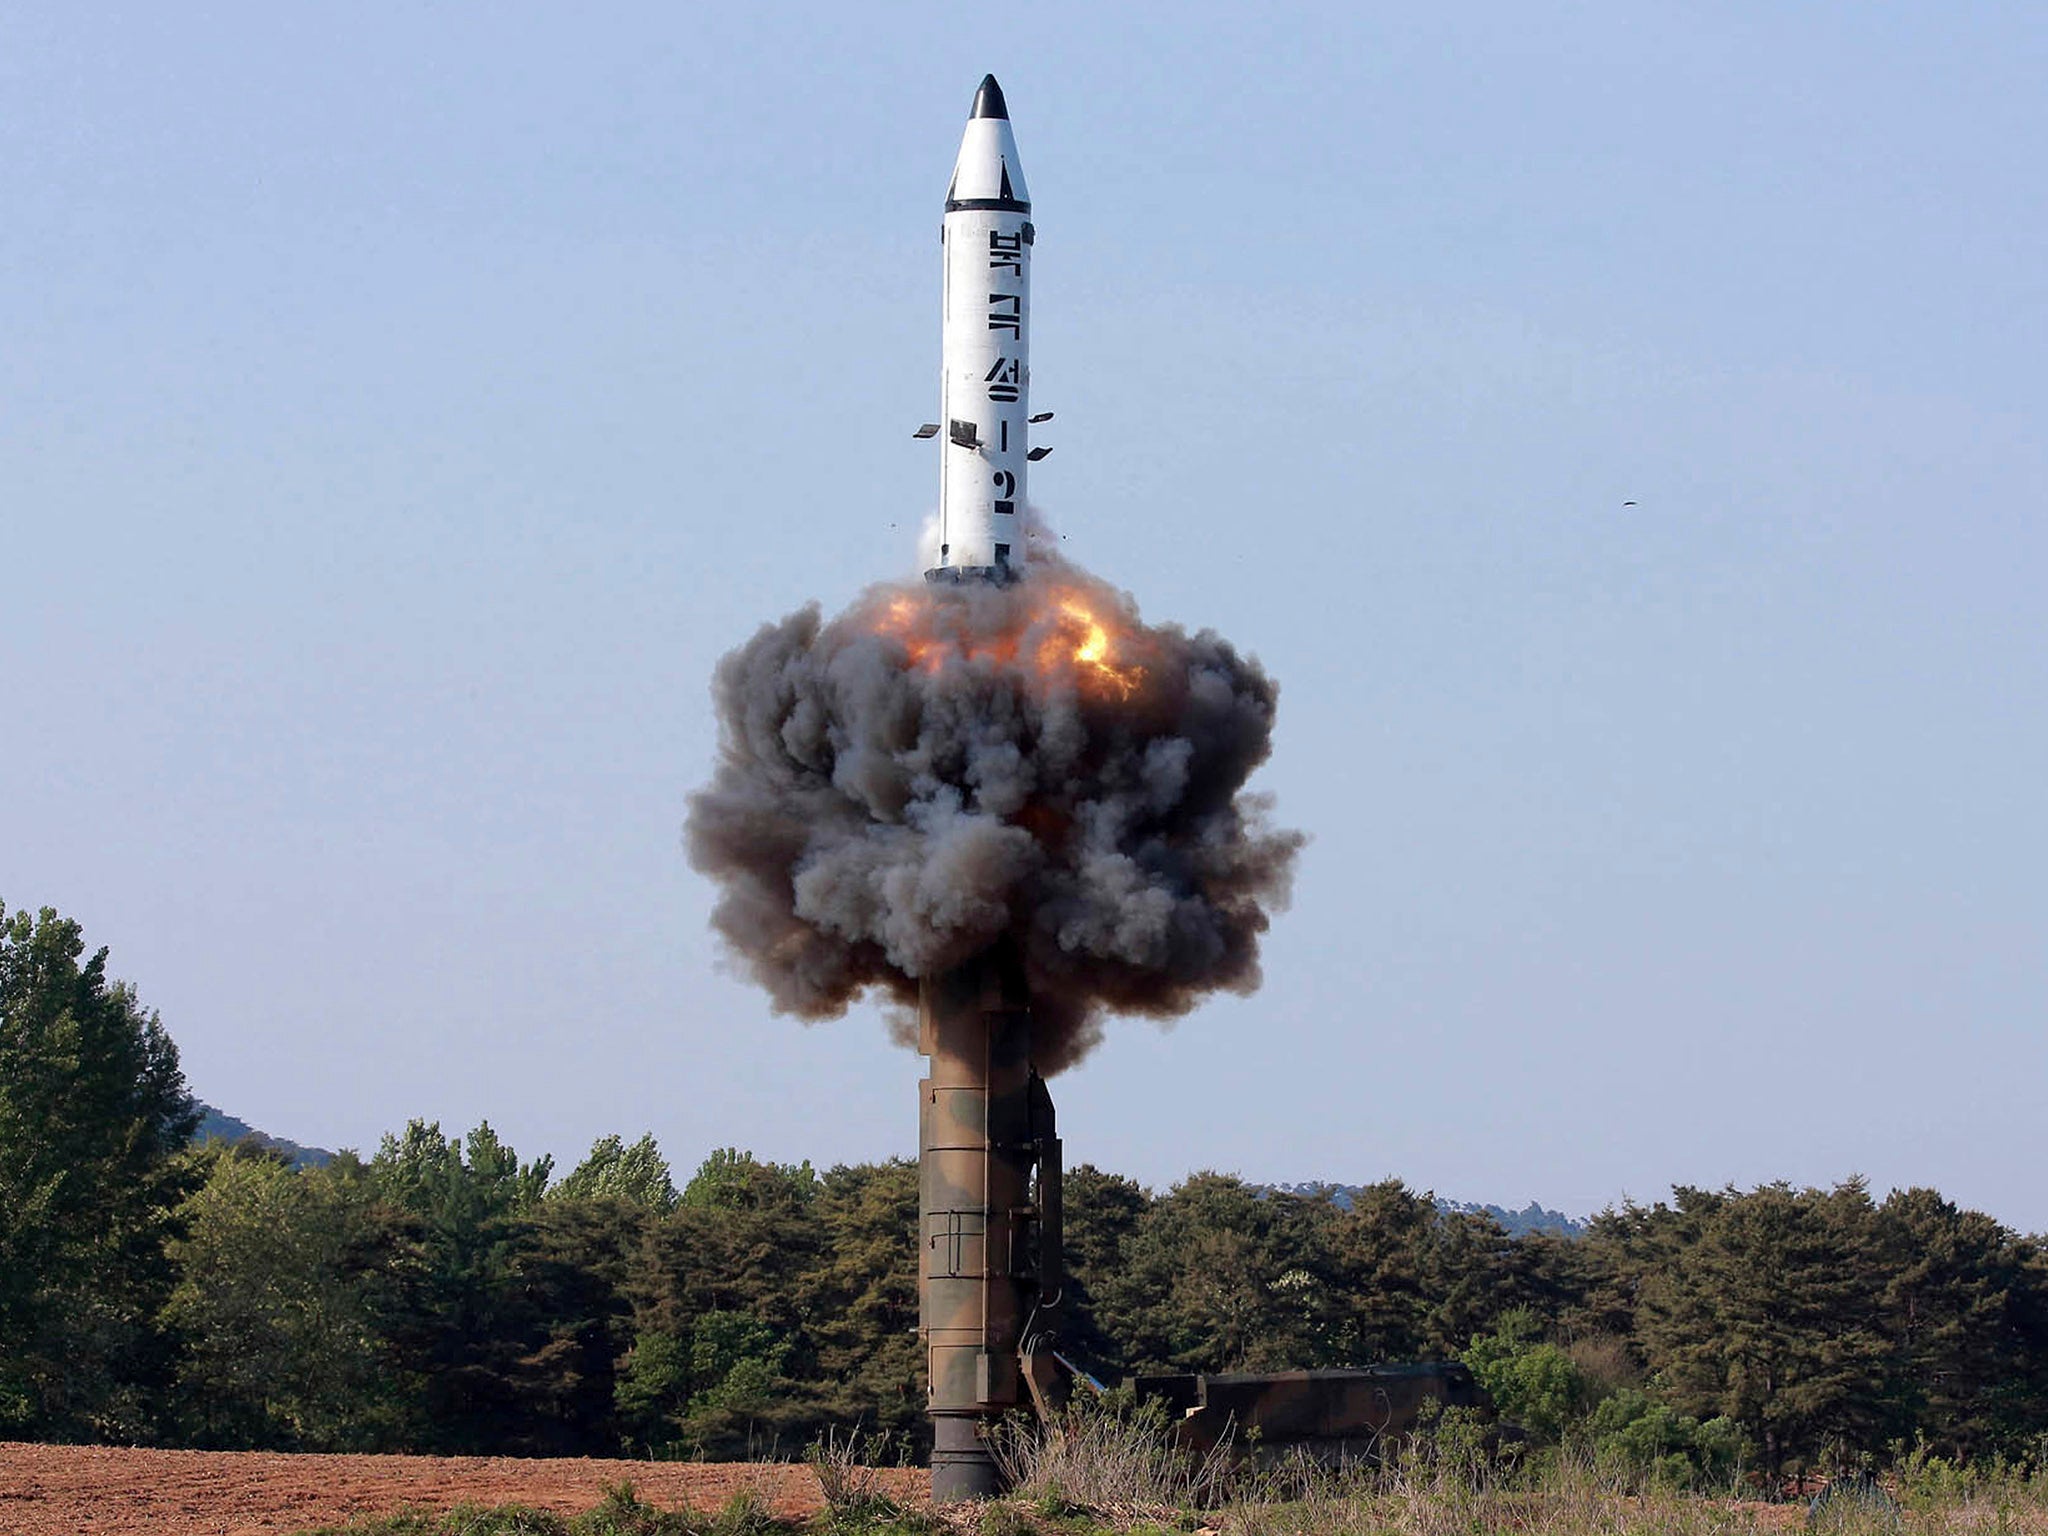 File photo distributed by the North Korean government in May 2017 shows a solid-fuel "Pukguksong-2" missile lifting off during a launch test at an undisclosed location